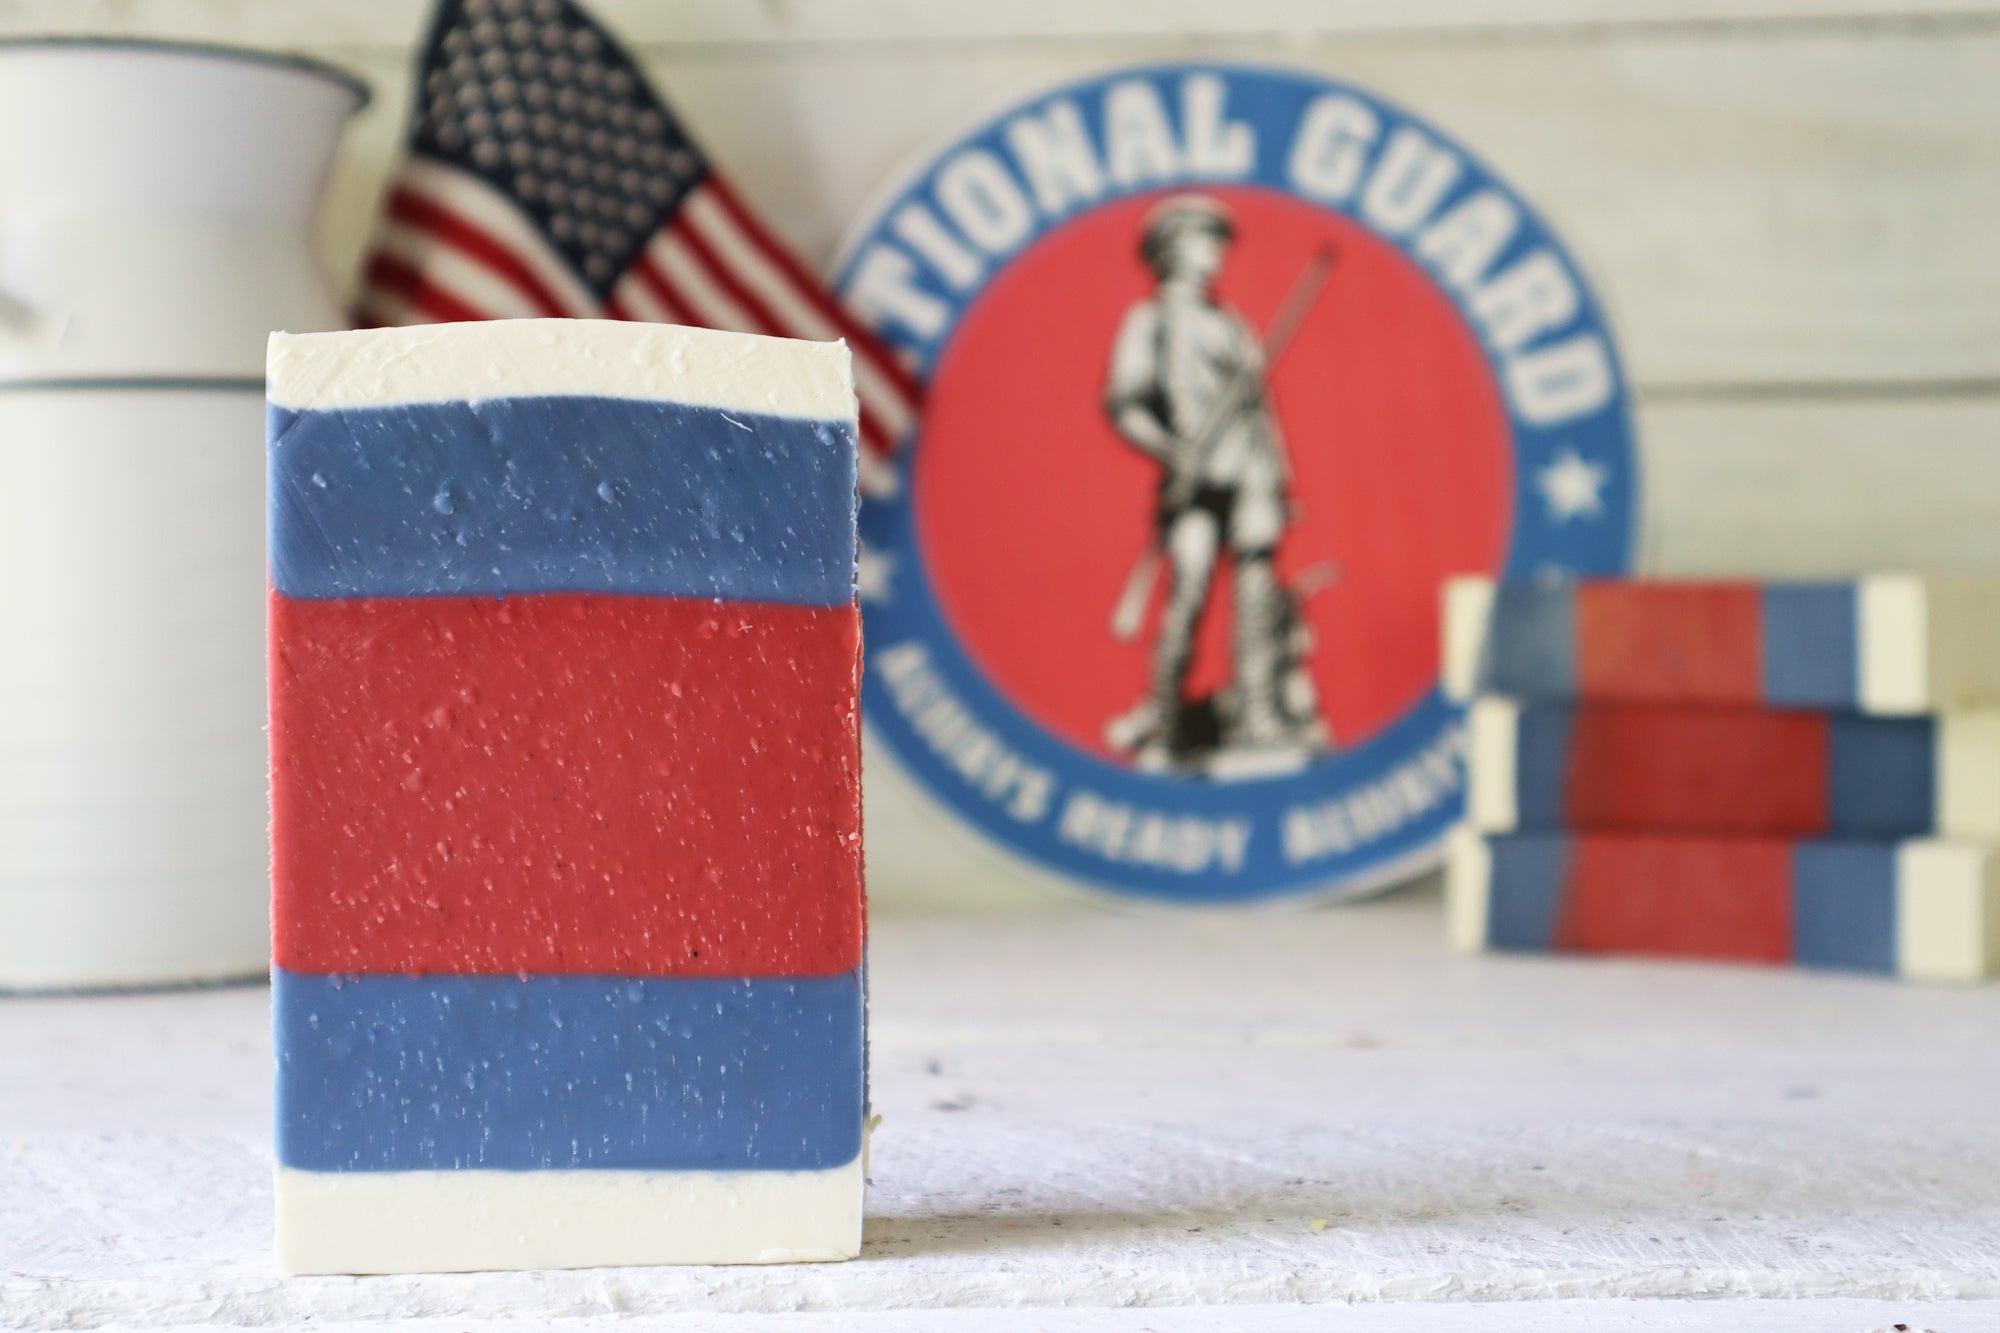 United States National Guard Soap